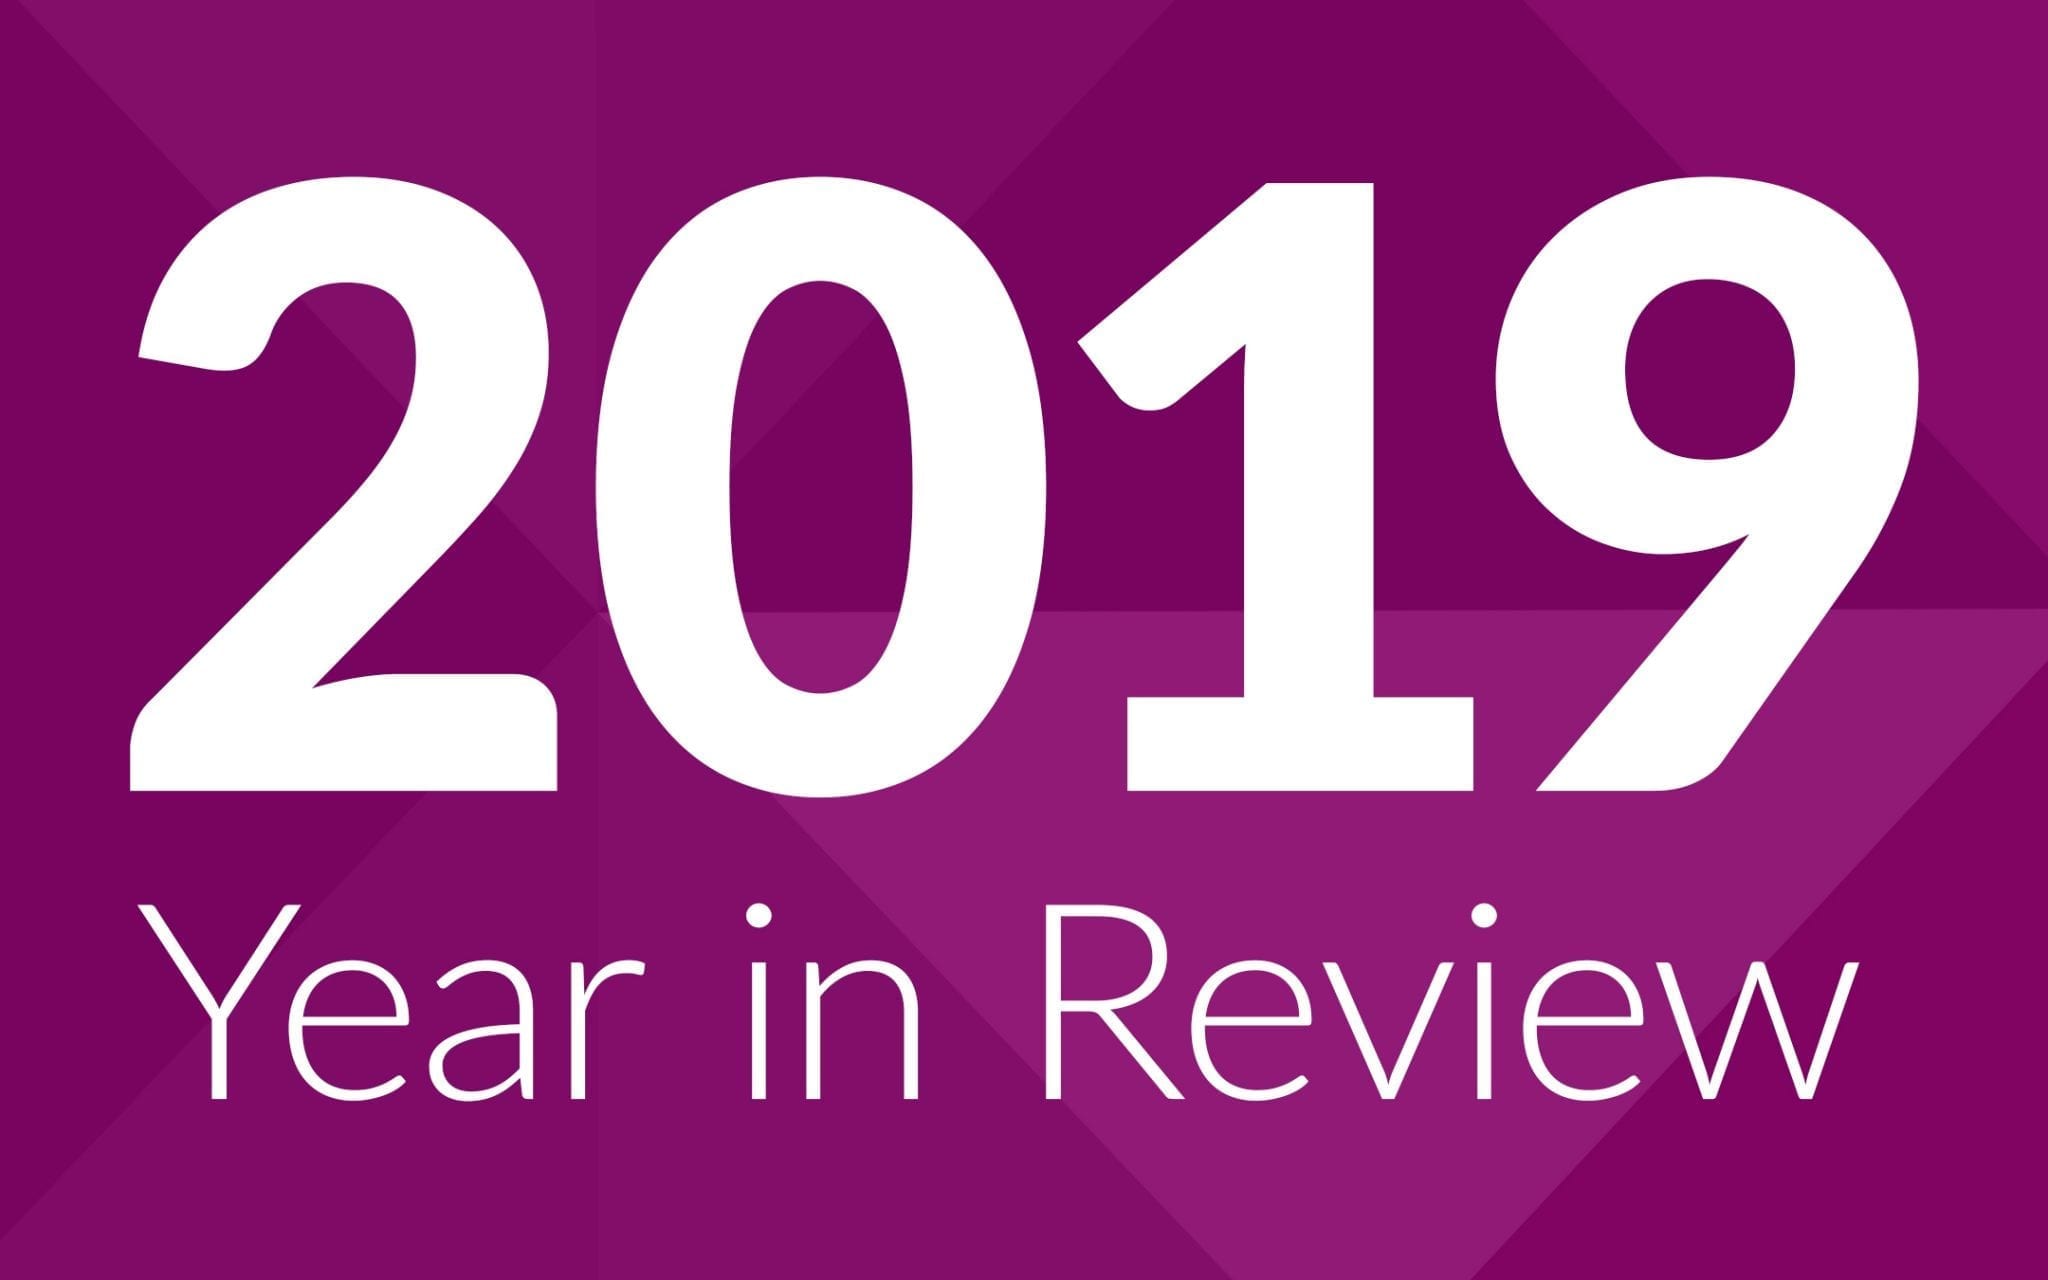 Carenet 2019 Year in Review graphic